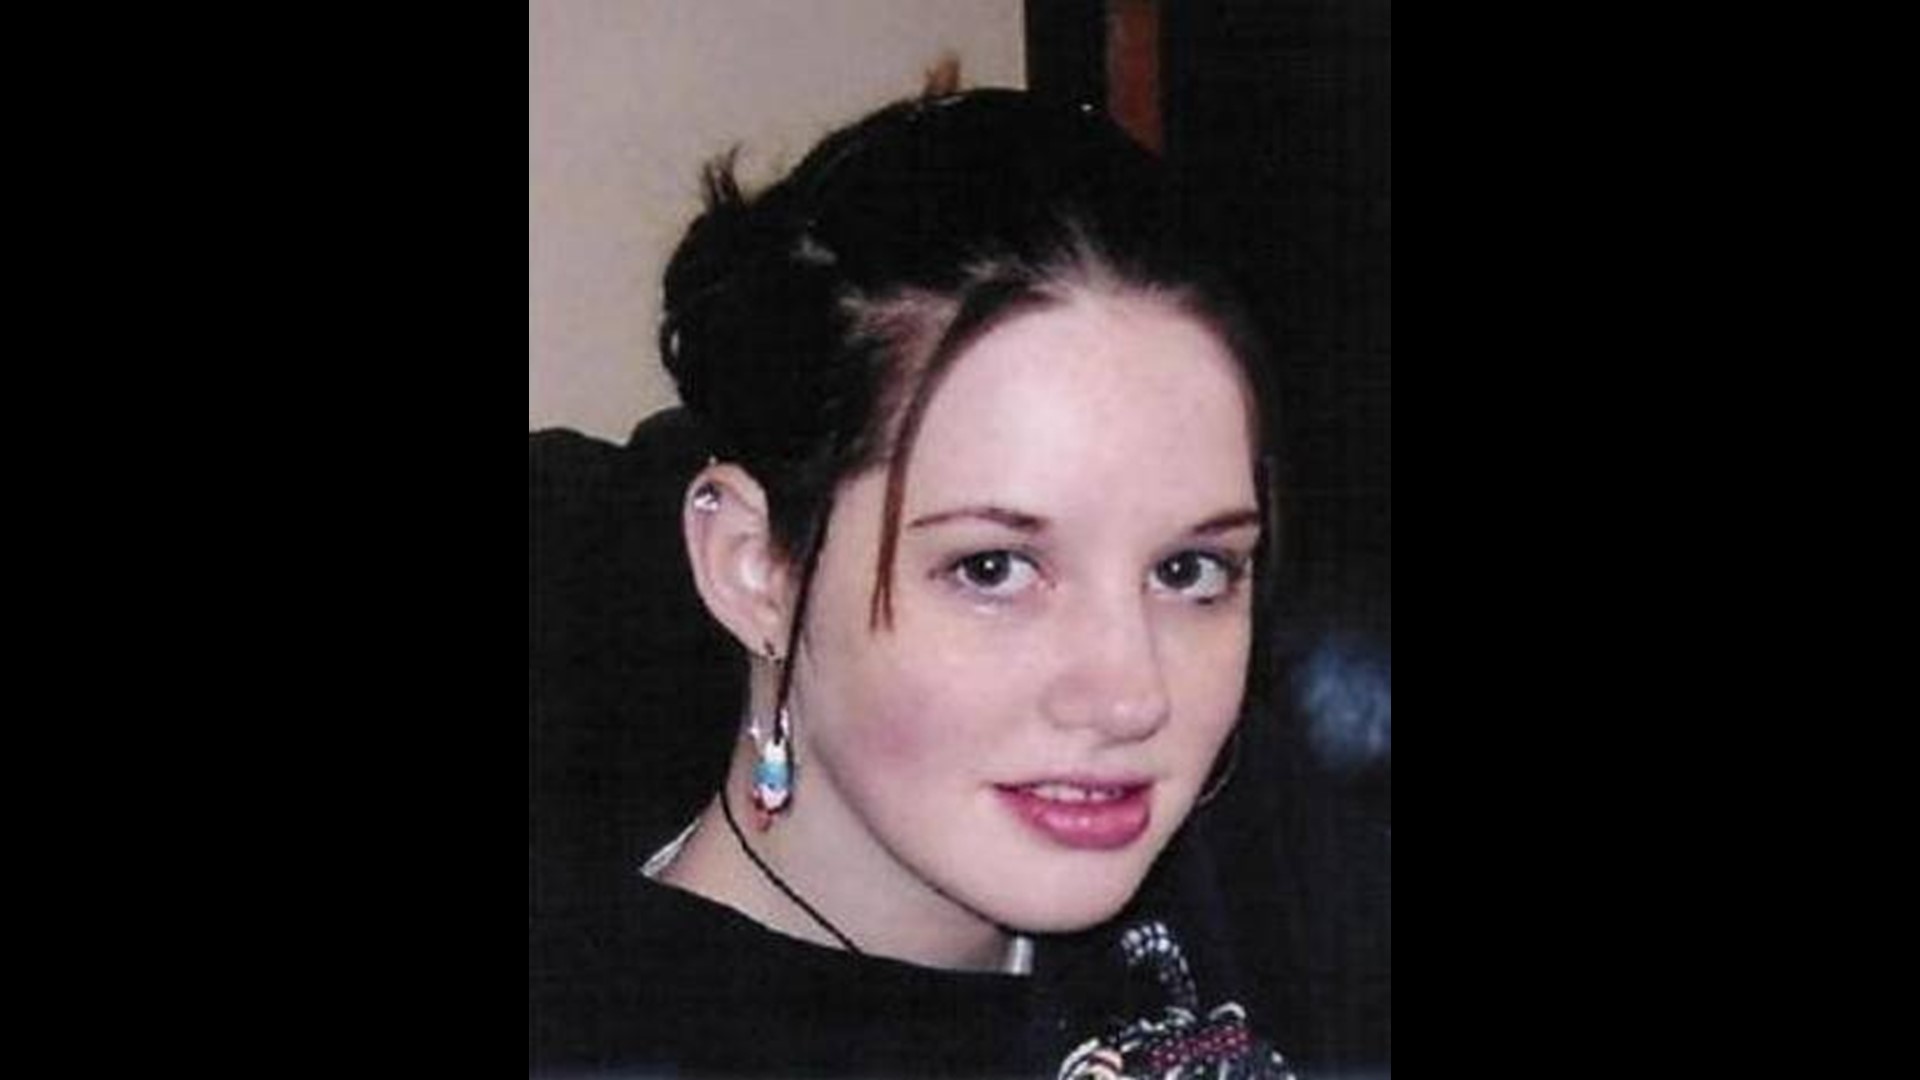 Gregory, who now goes by Harli Quinn, was convicted of the 2005 murder of 16-year-old Adrianne Renolds. Now, a judge has upheld Quinn's 45-year prison sentence.